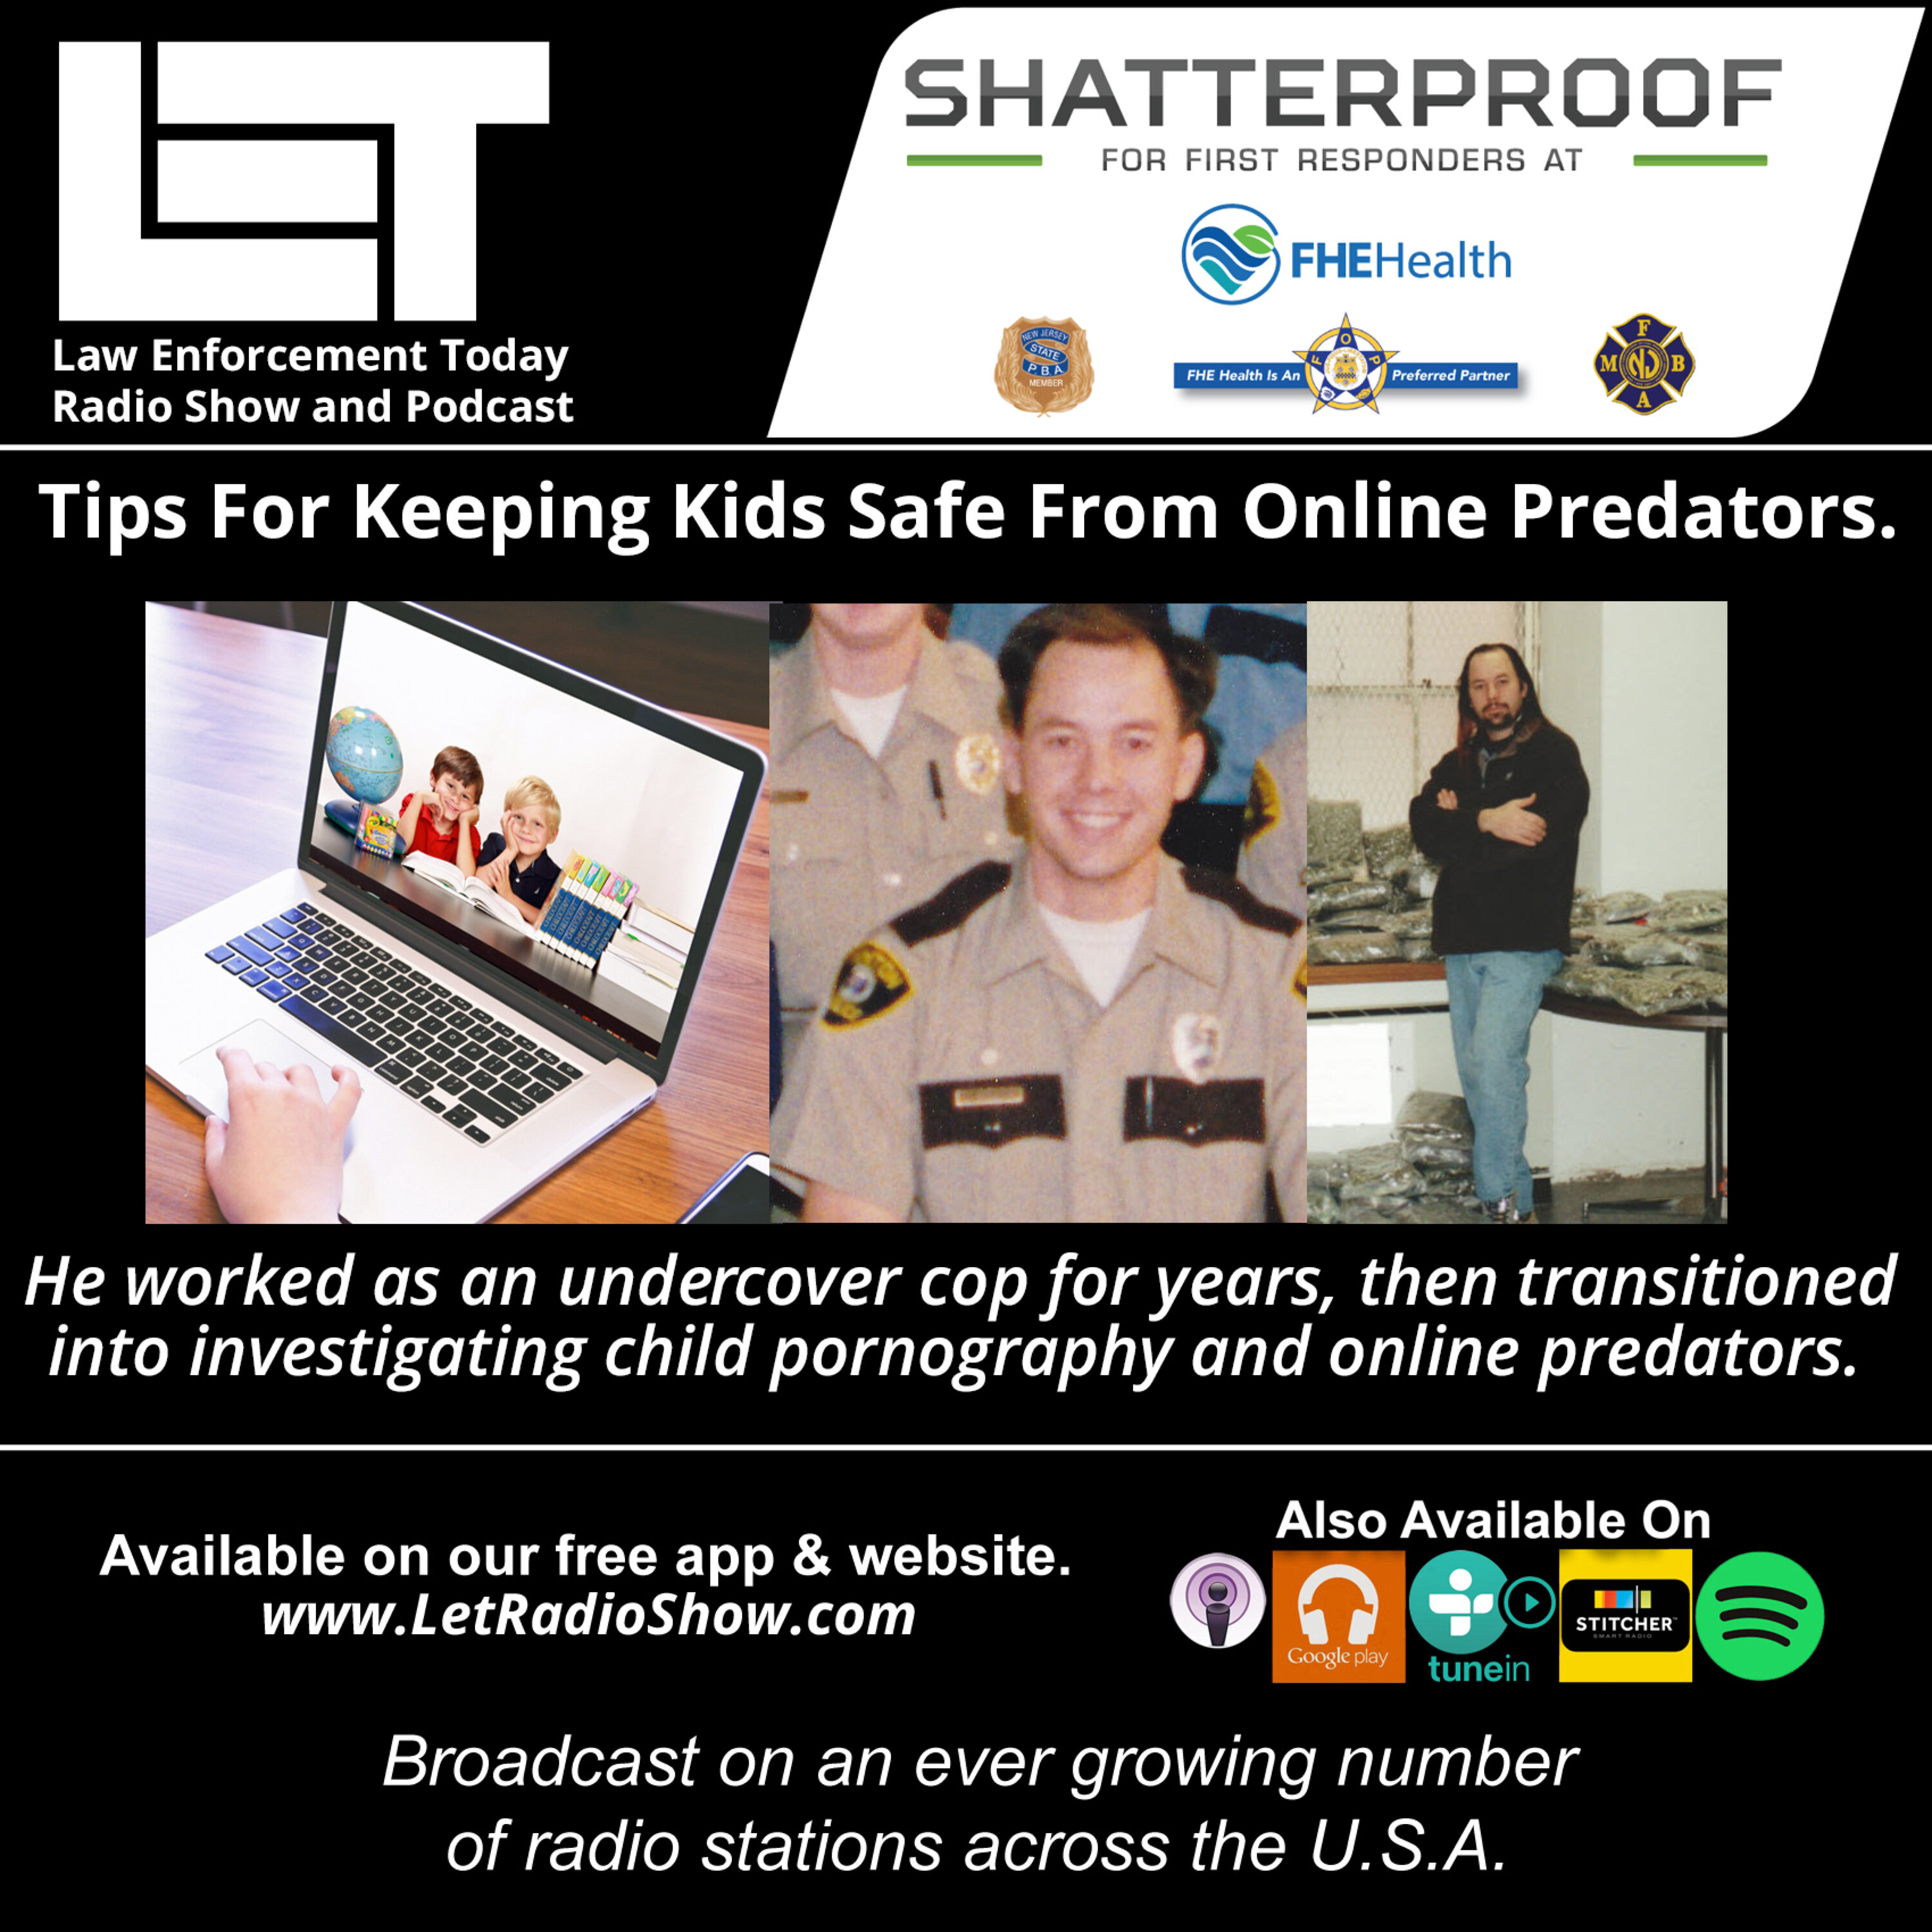 S6E33: Tips For Keeping Kids Safe From Online Predators. He worked as an undecover cop for years, then transitioned into investigating child pornography and online predators.